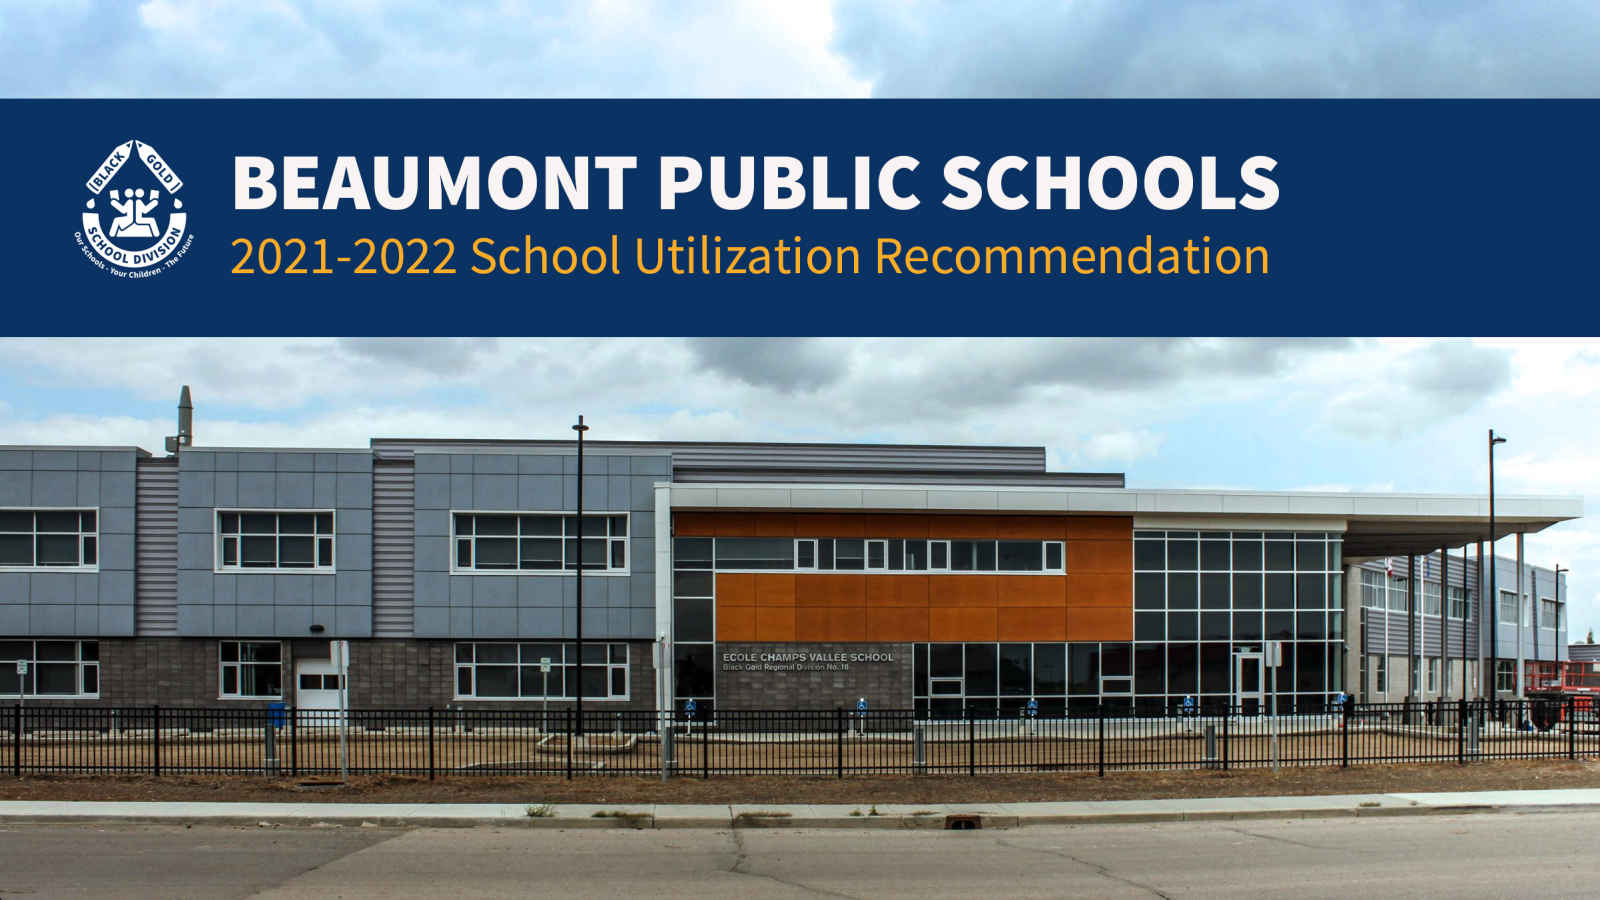 Board approves utilization recommendations for Beaumont schools